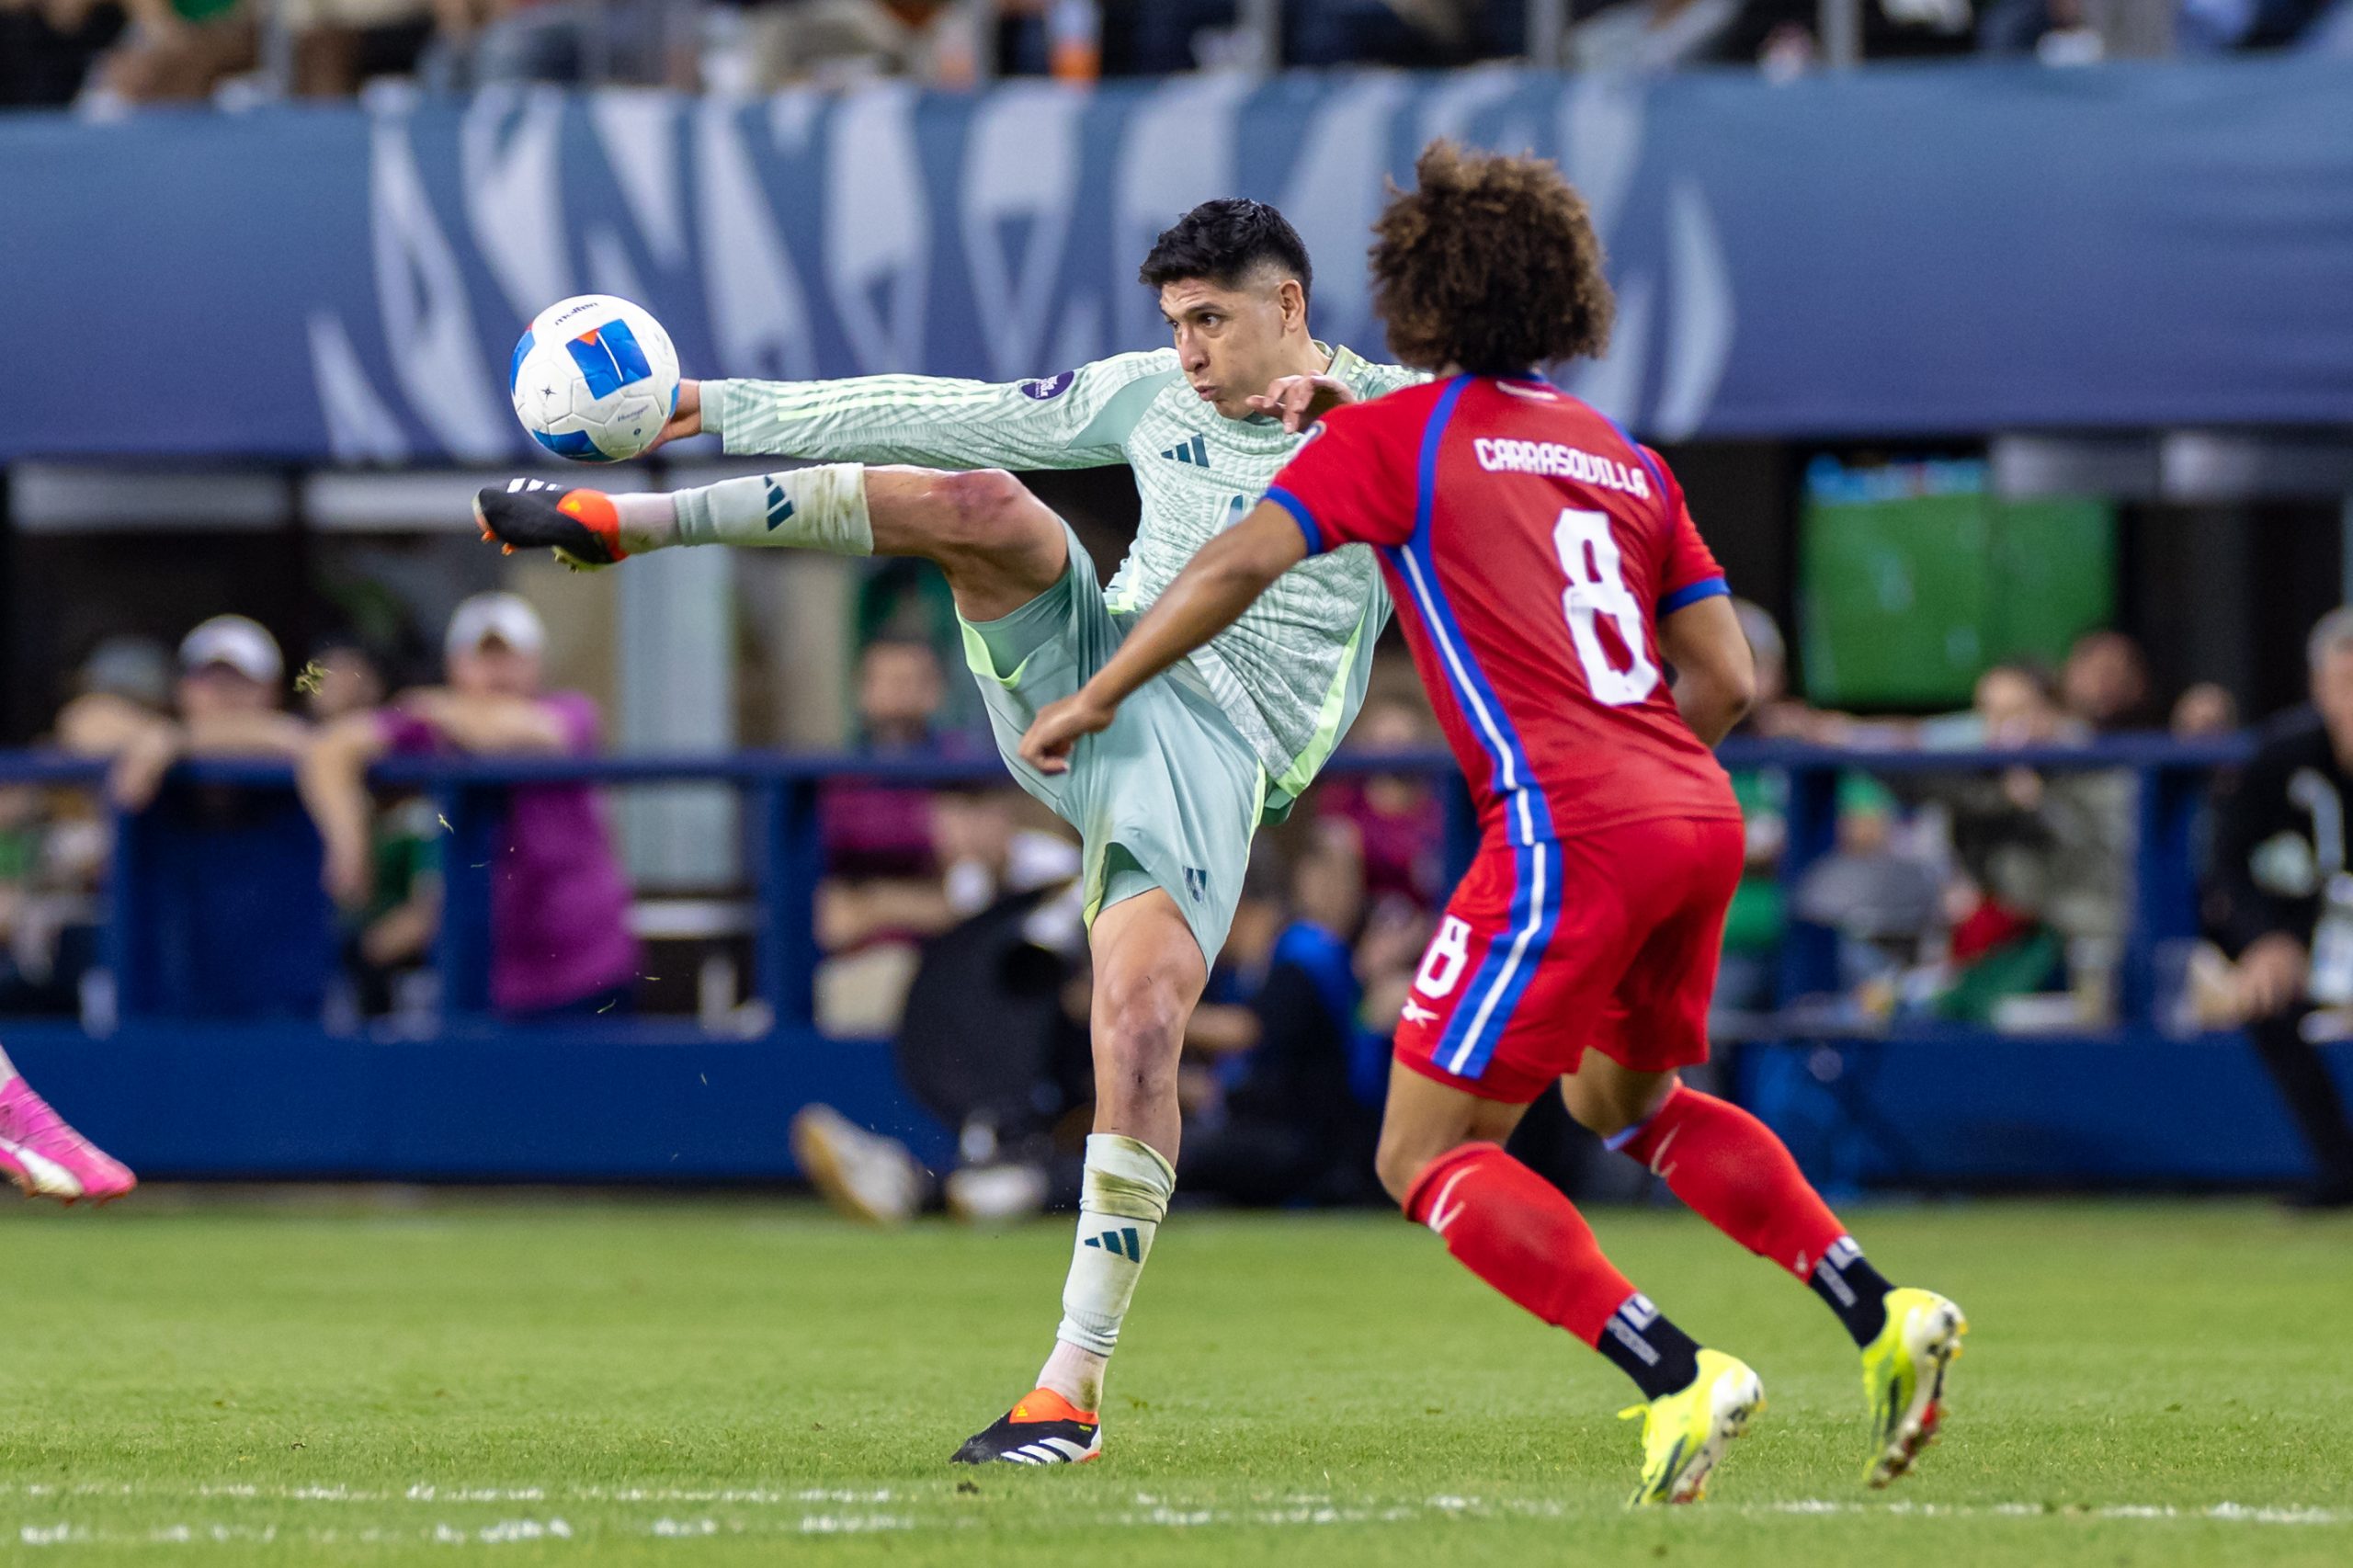 Coco Carrasquilla defends against Mexico as Panama fall 3-0 on March 21, 2024, at AT&T Stadium in Arlington, Texas. (Matt Visinsky, 3rd Degree)